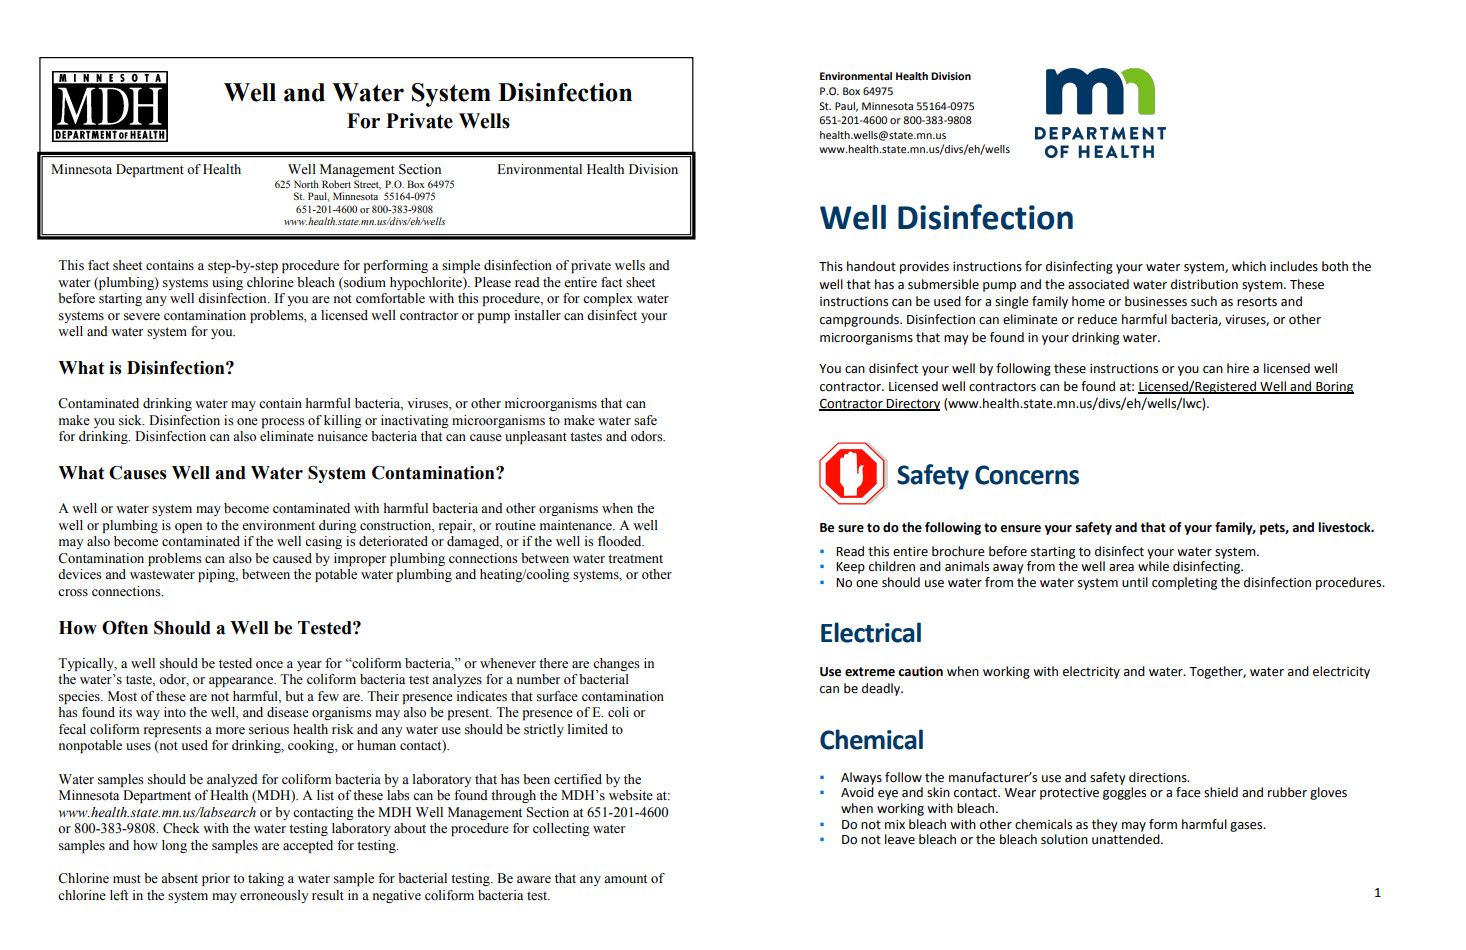 Why Sometimes Newer Isn’t Always Better: Minnesota Department of Health’s Well Disinfection Guide